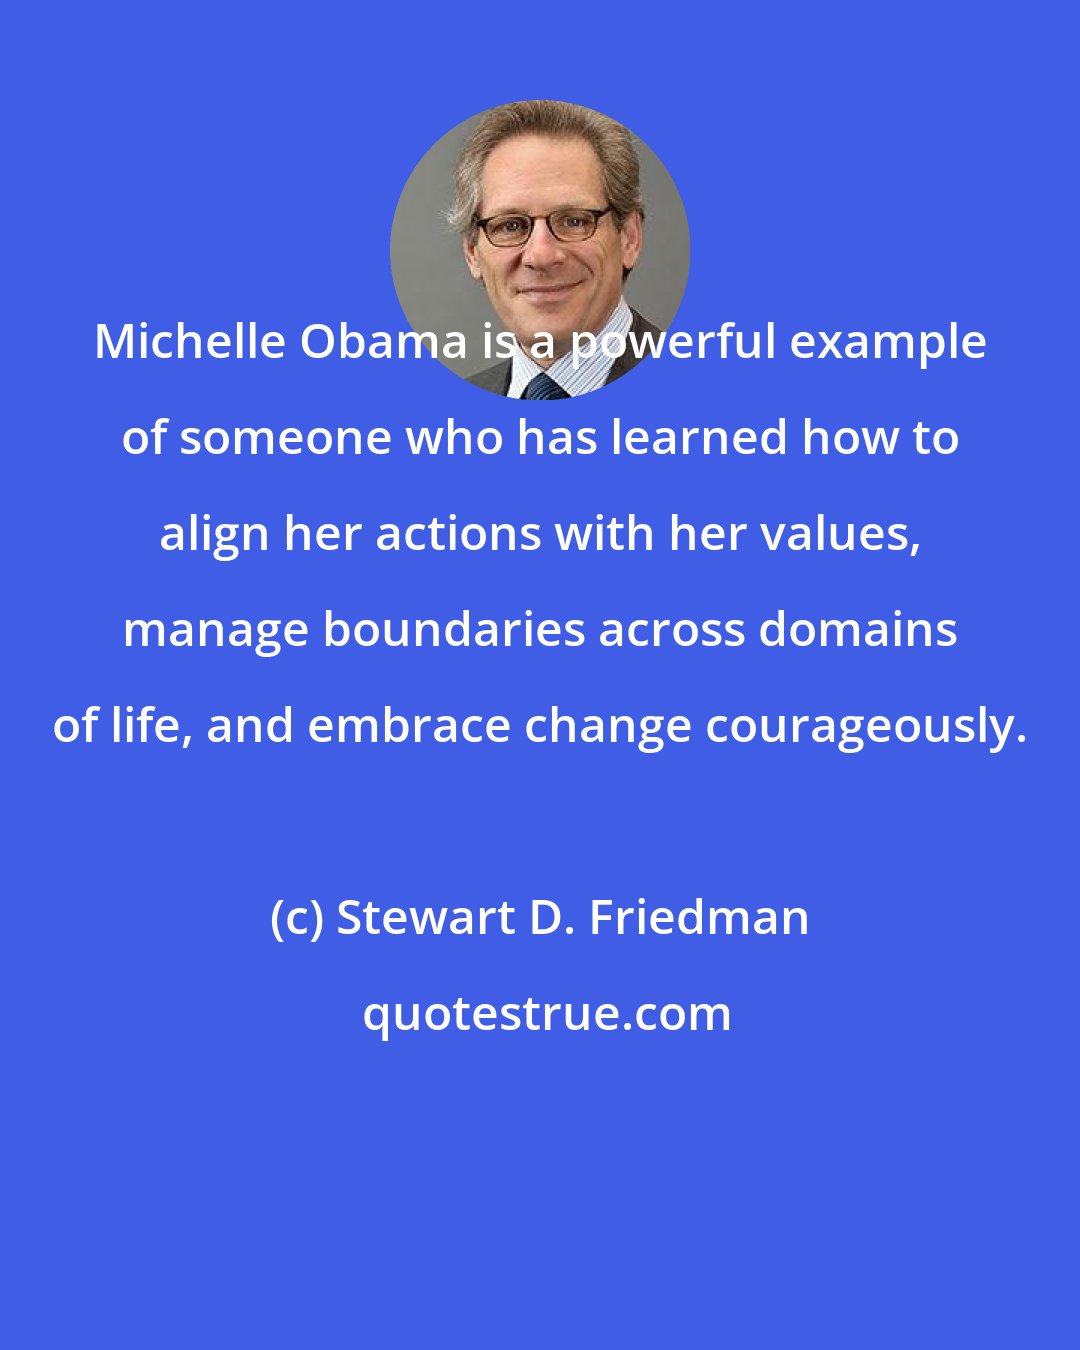 Stewart D. Friedman: Michelle Obama is a powerful example of someone who has learned how to align her actions with her values, manage boundaries across domains of life, and embrace change courageously.